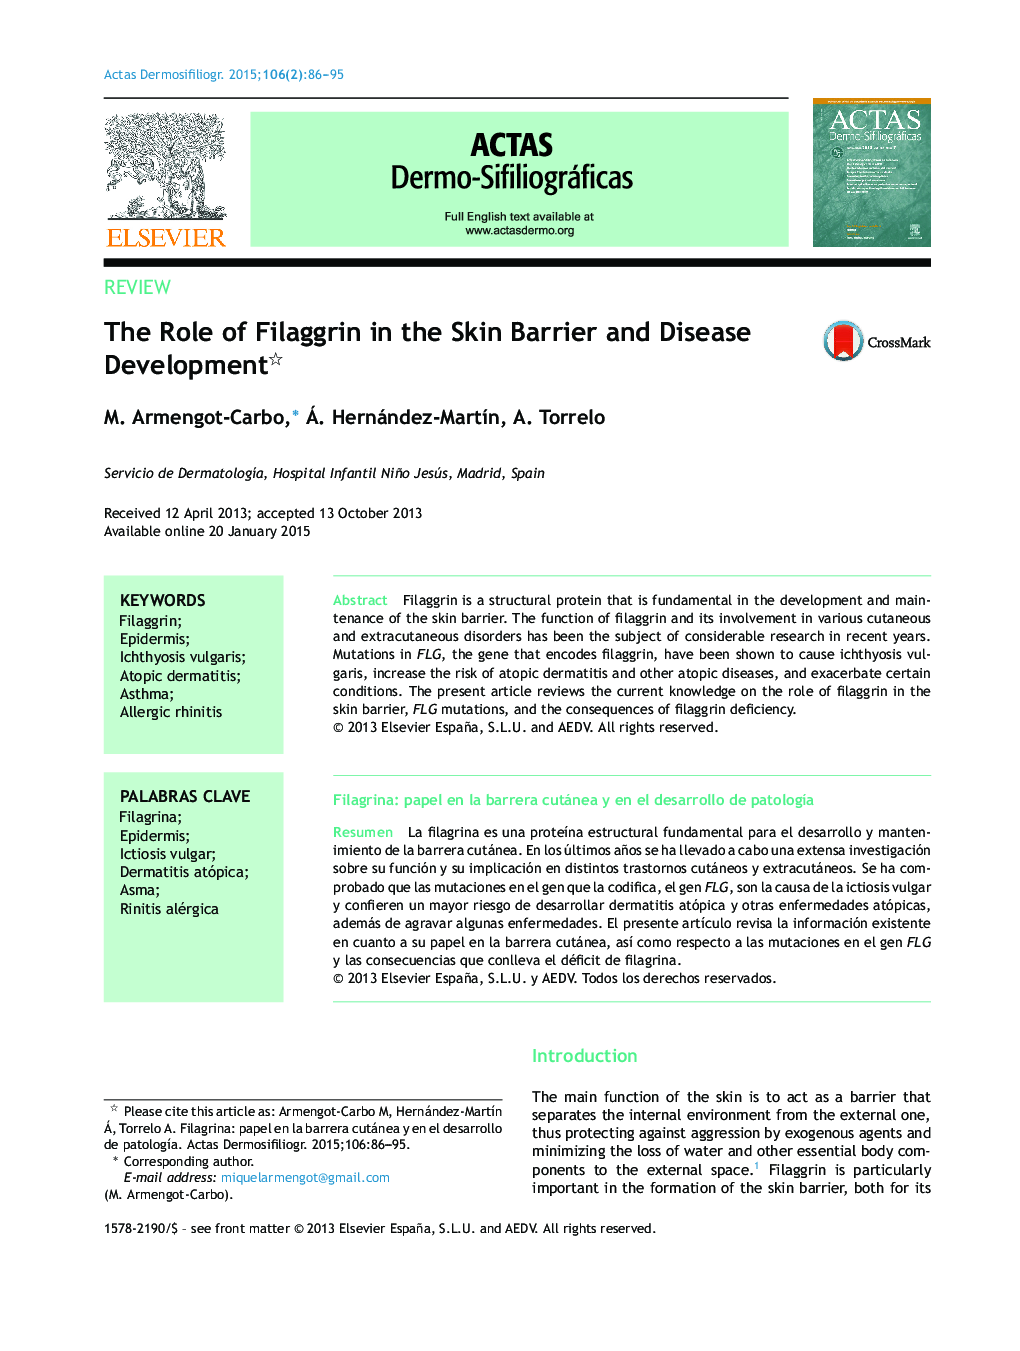 The Role of Filaggrin in the Skin Barrier and Disease Development 